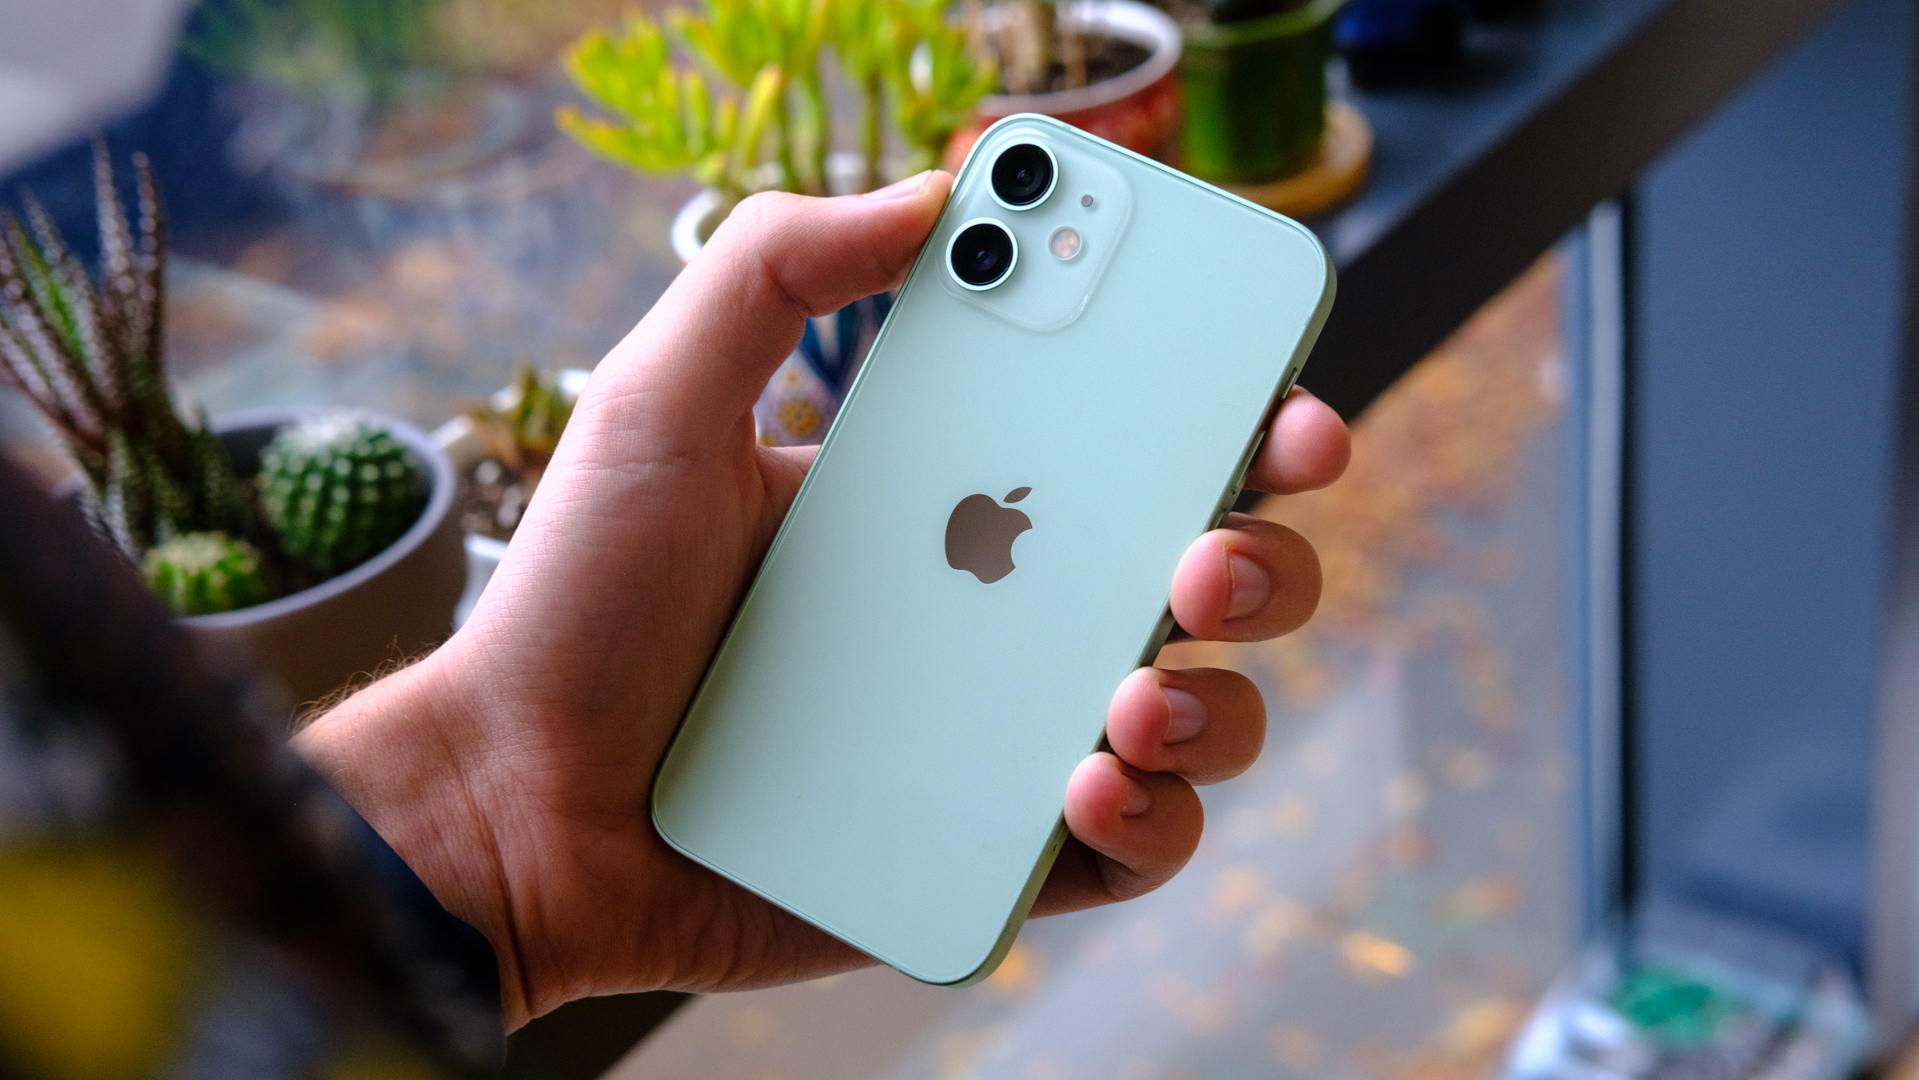 Apple iPhone 12 Mini review: Pint-sized power